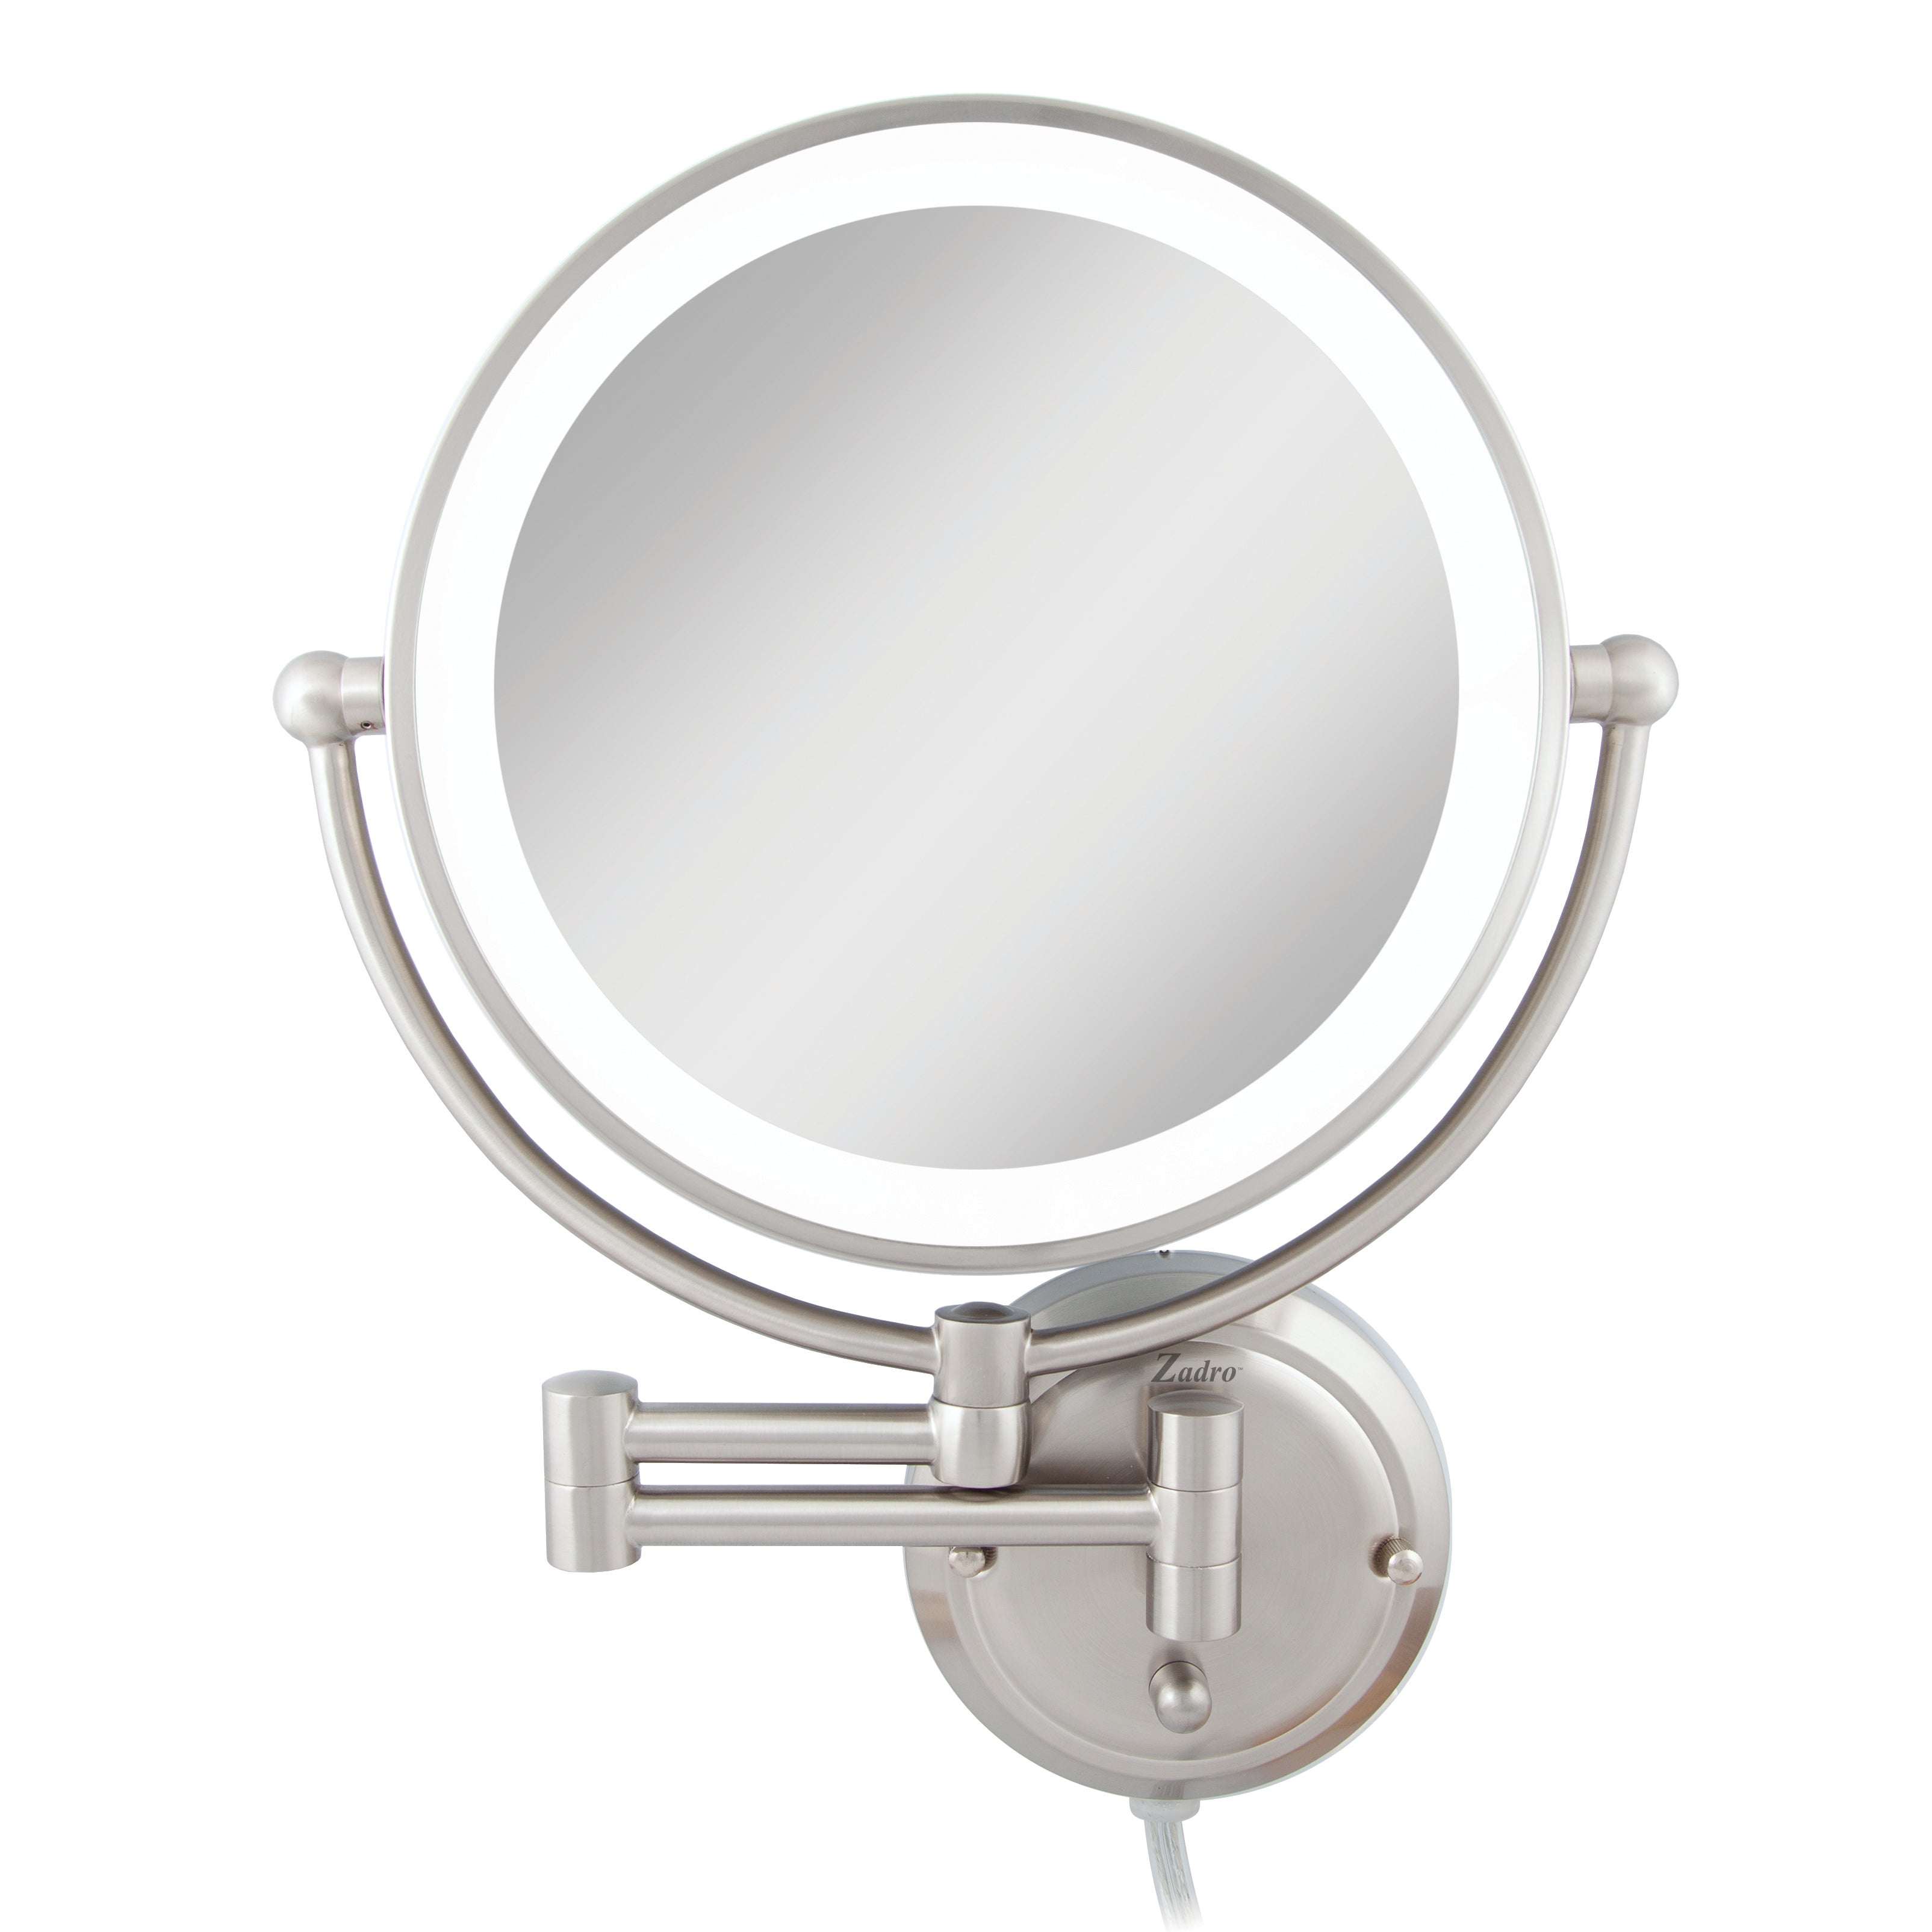 Glamour Lighted Wall Mounted Makeup Mirror with Magnification